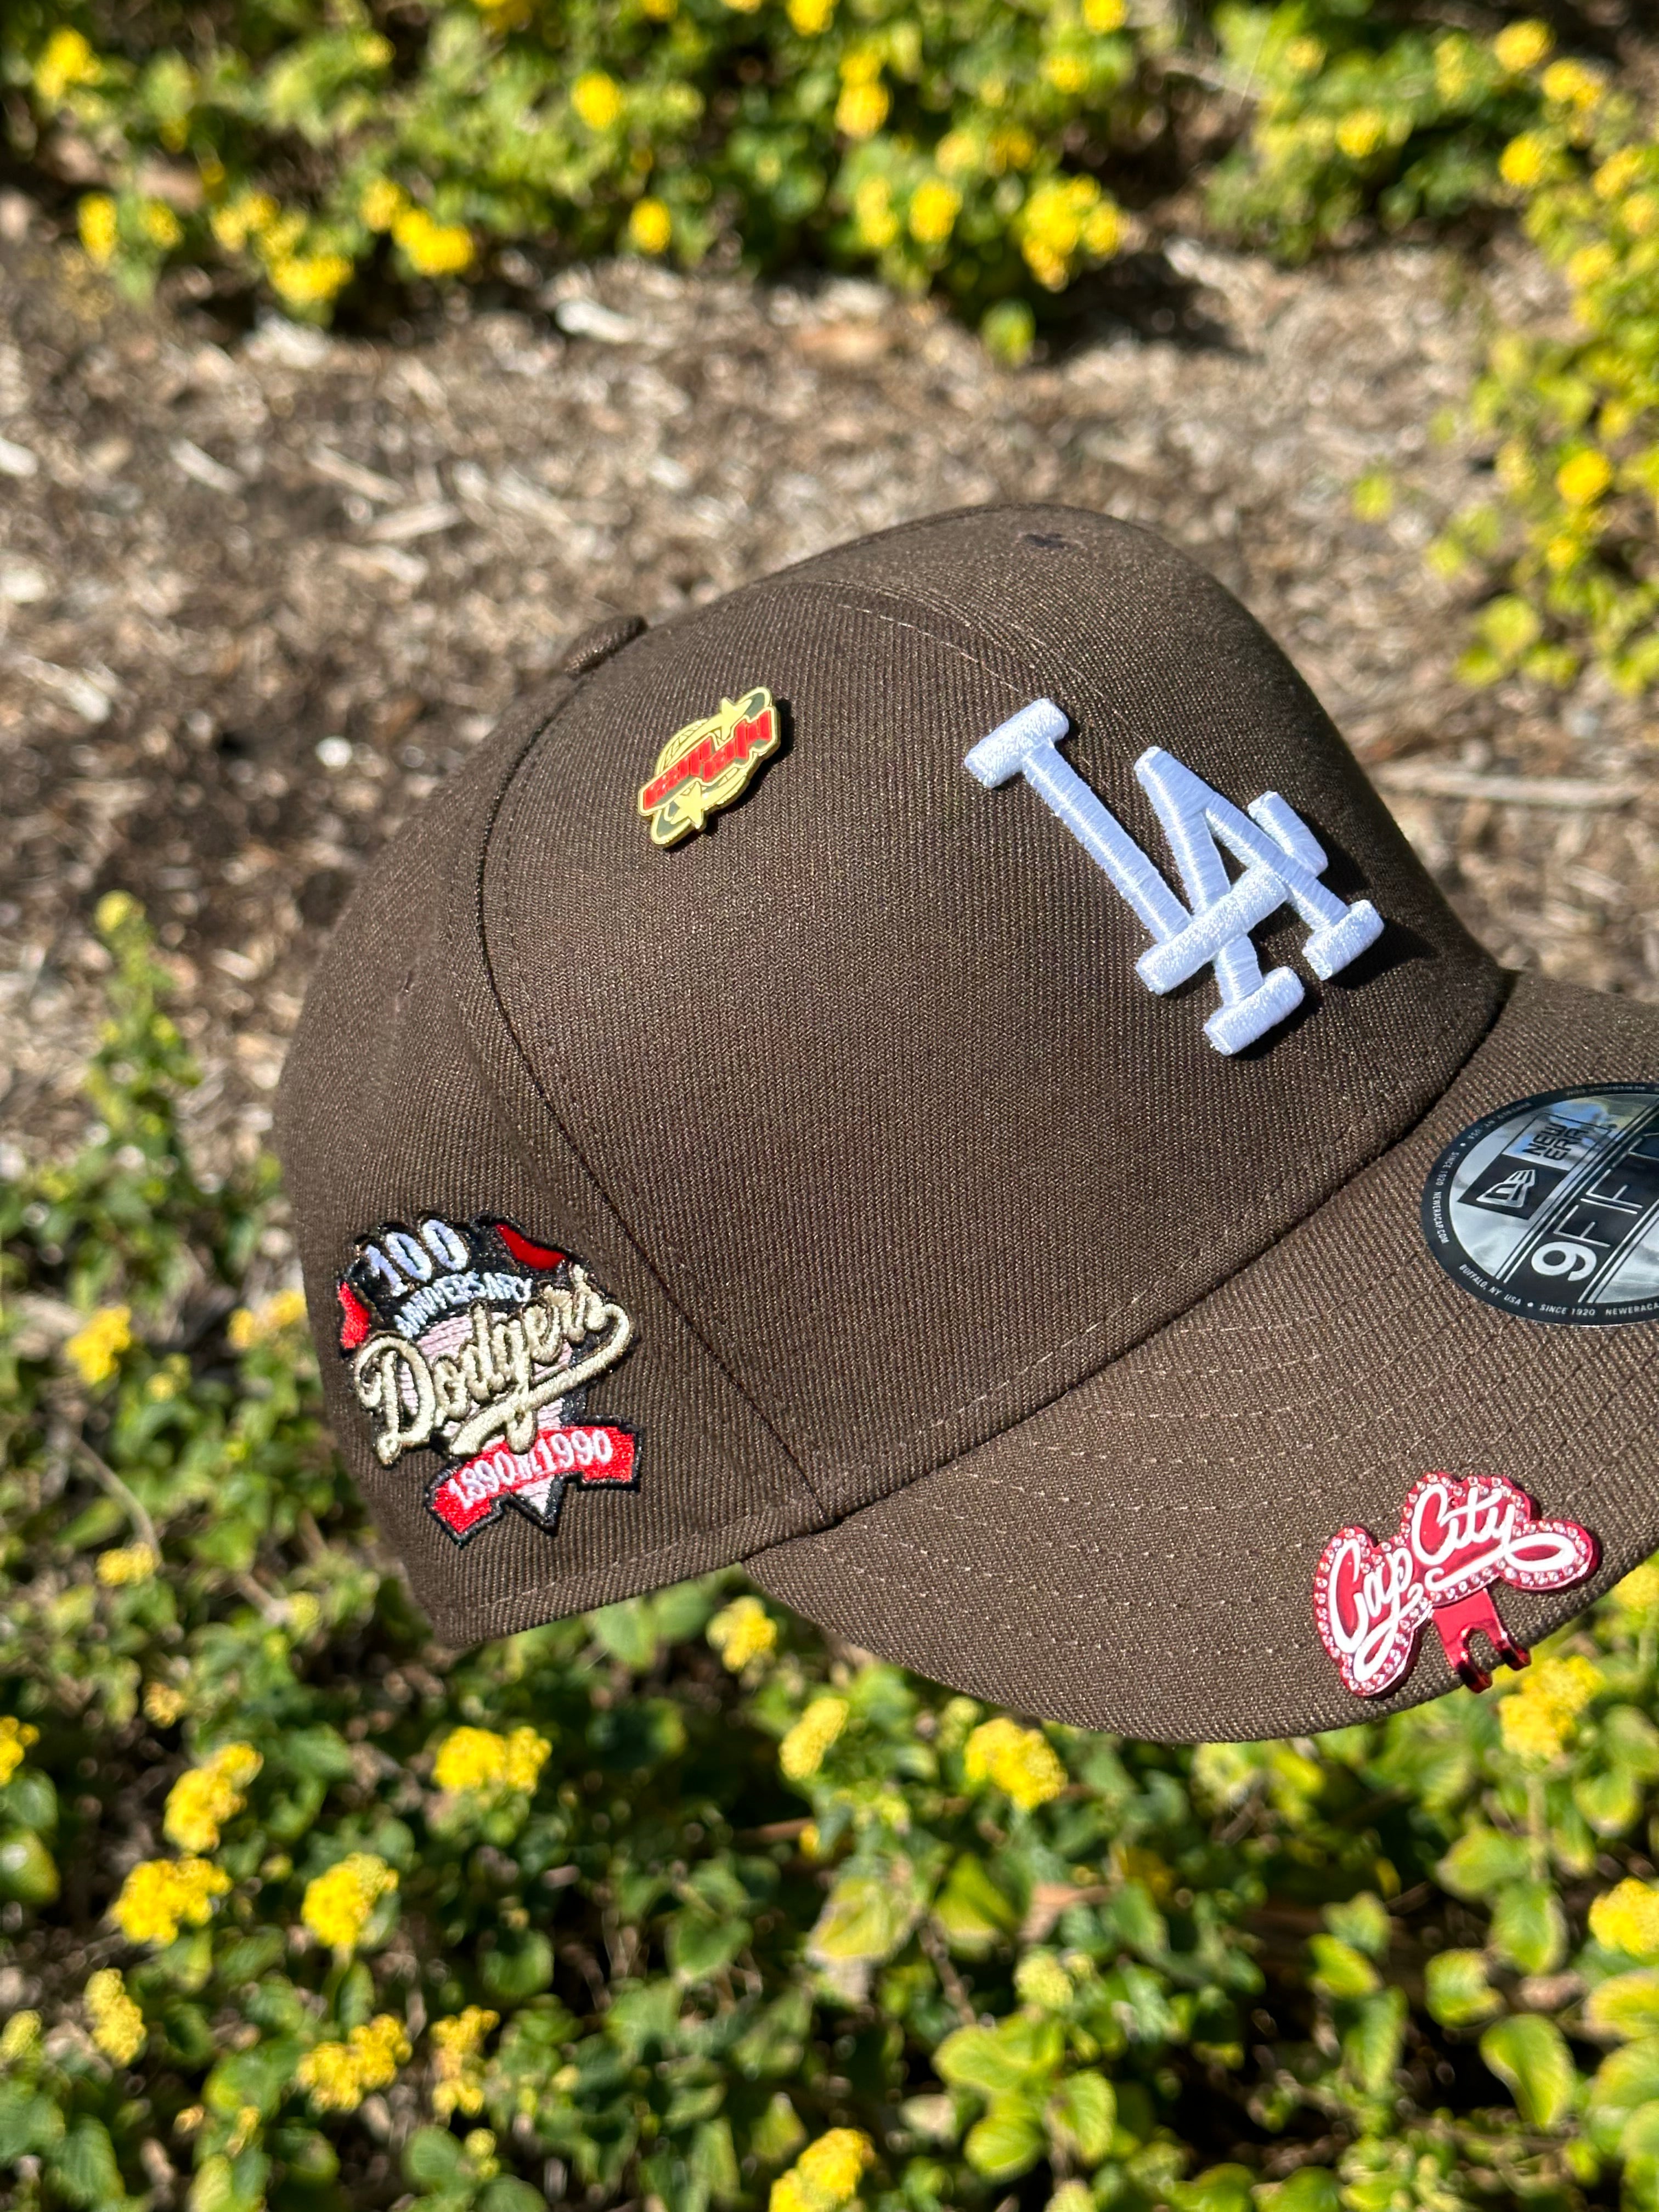 NEW ERA EXCLUSIVE 9FIFTY WALNUT BROWN LOS ANGELES DODGERS SNAPBACK W/ 100TH ANNIVERSARY PATCH